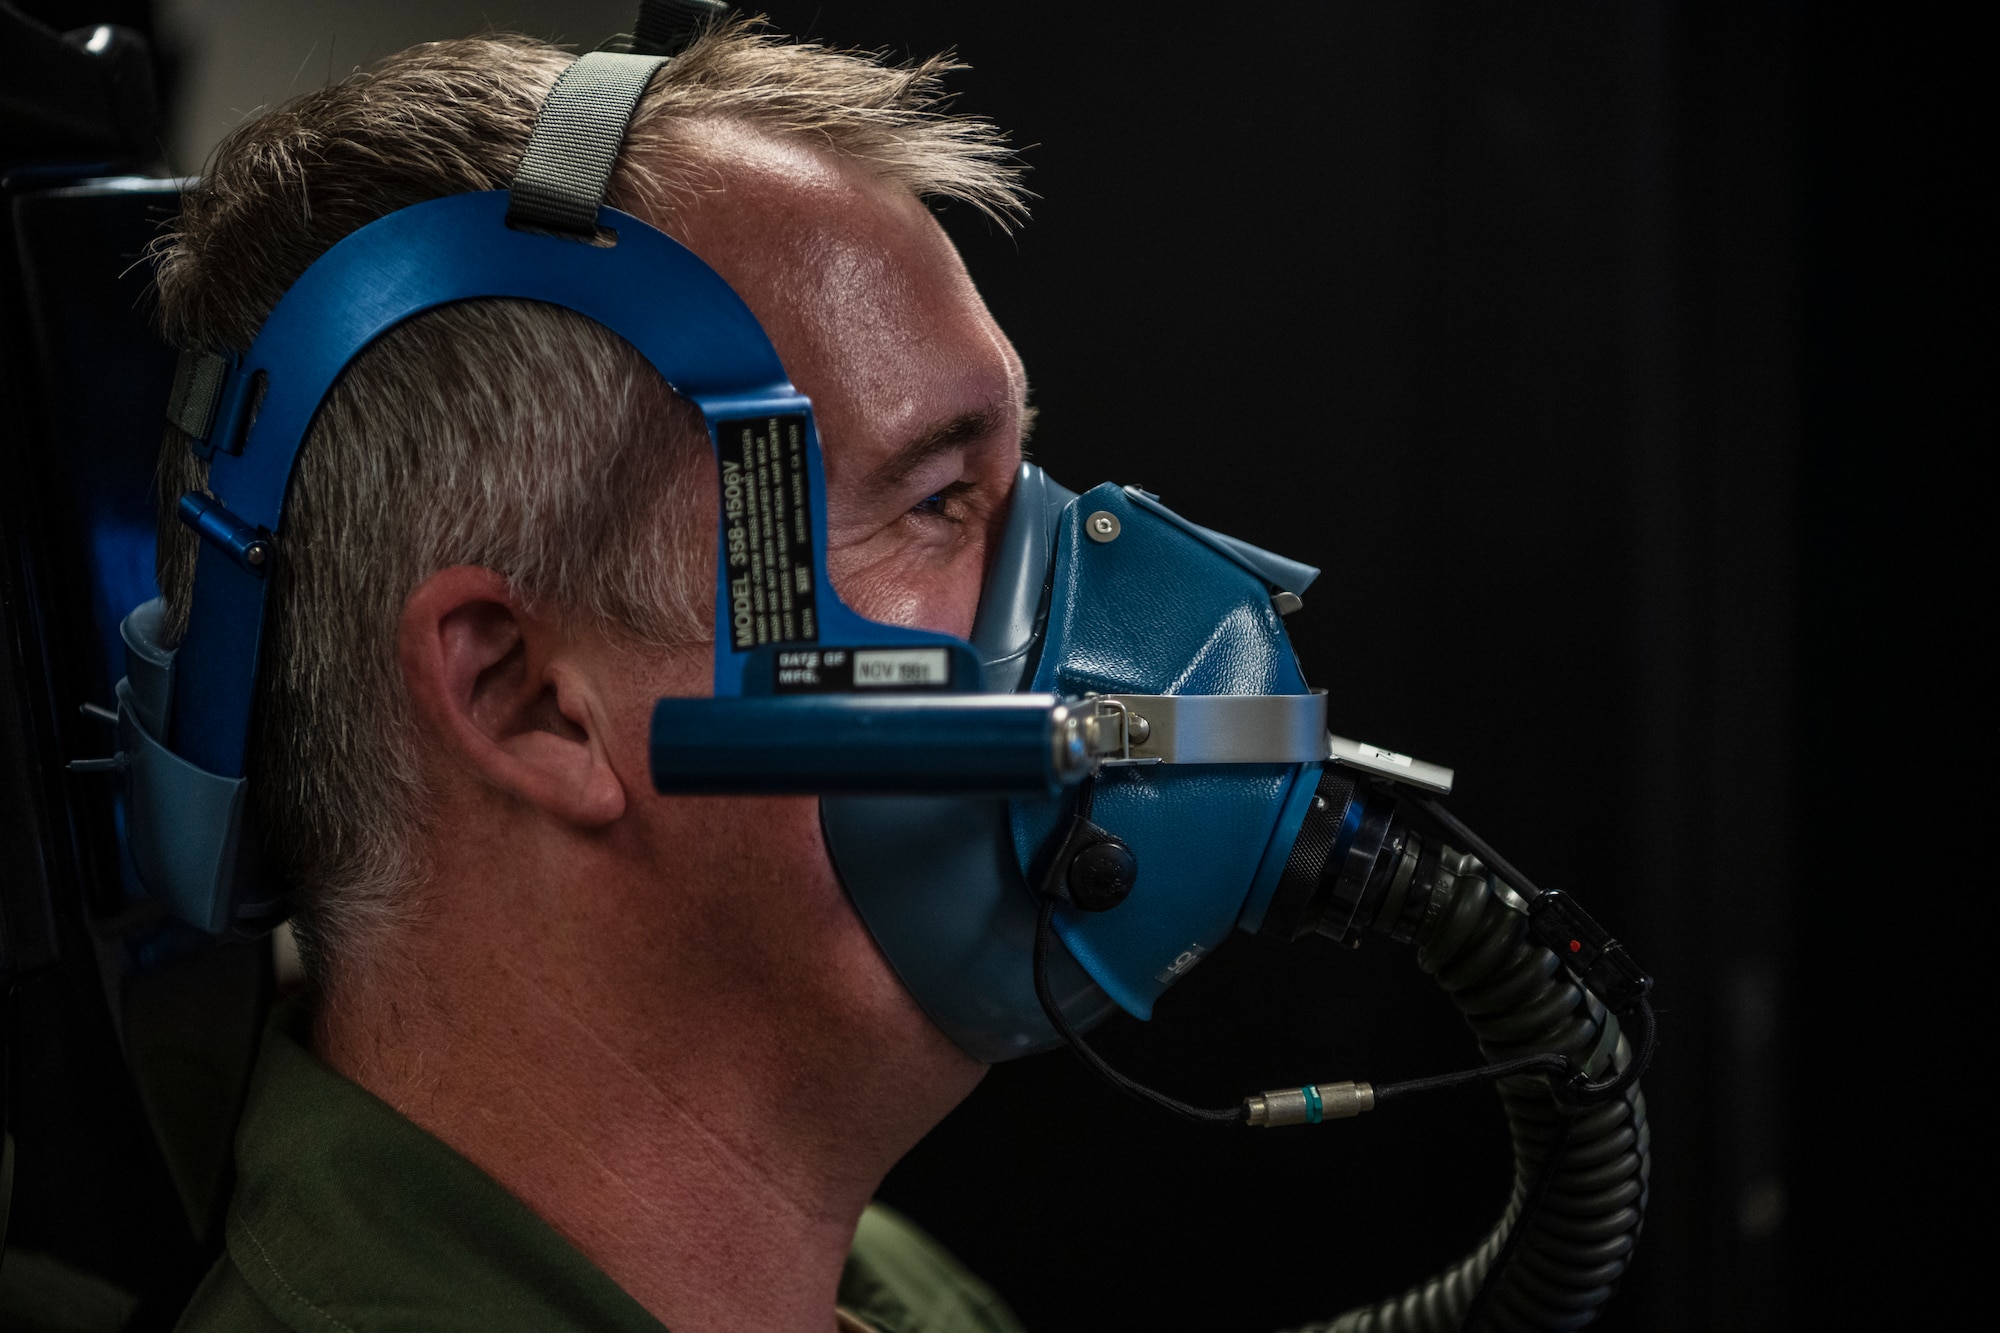 A man wears a breathing apparatus during a classroom training situation.